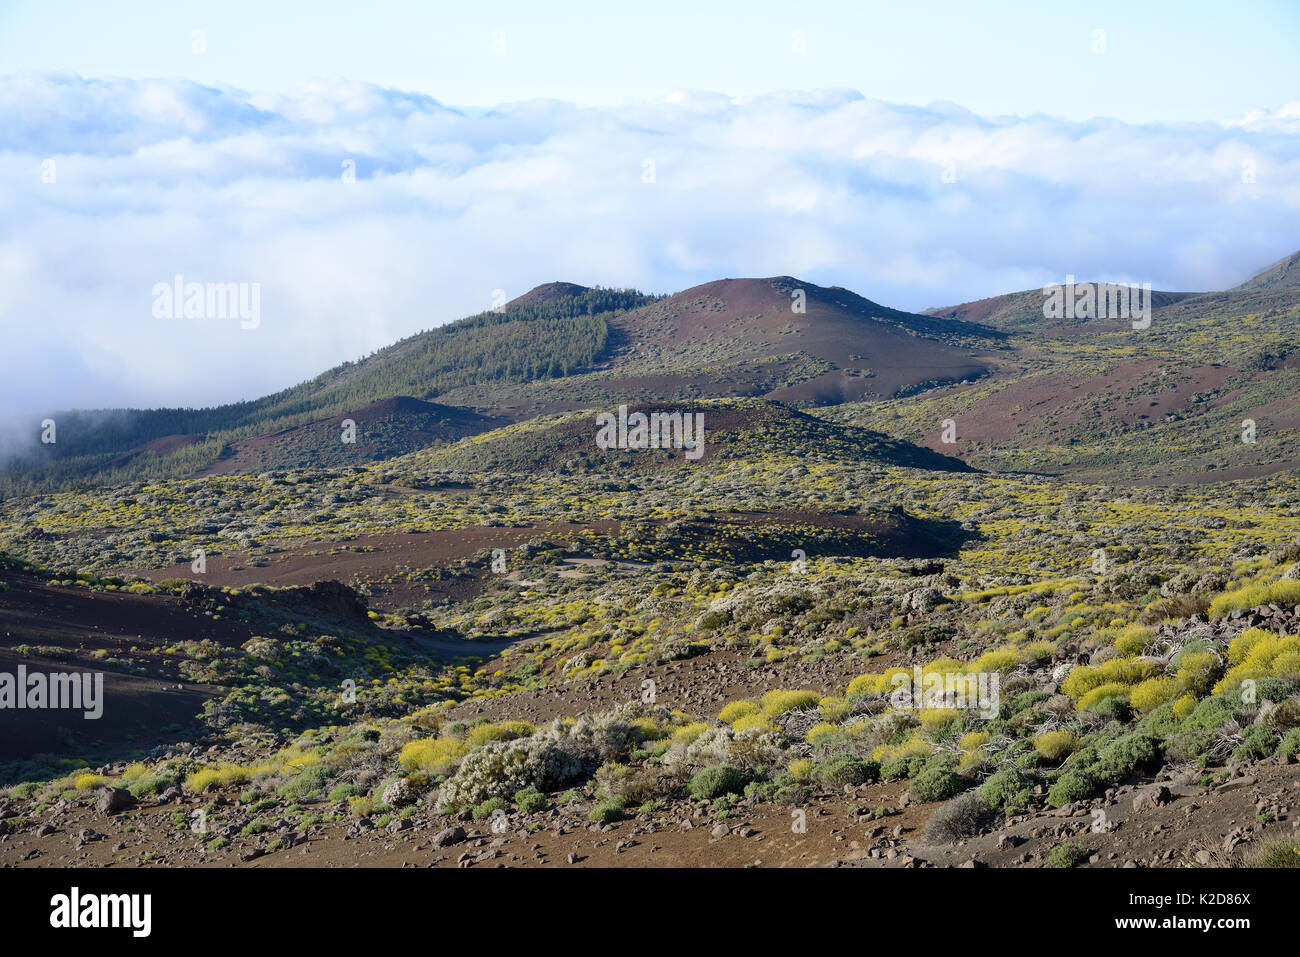 Cloud around the highlands of Tenerife, with dense forests of Canary Island pine (Pinus canariensis) and montane endemics including Teide white broom (Spartocytisus supranubius) and Teide straw (Descourainia bourgaeana), Tenerife, May. Stock Photo